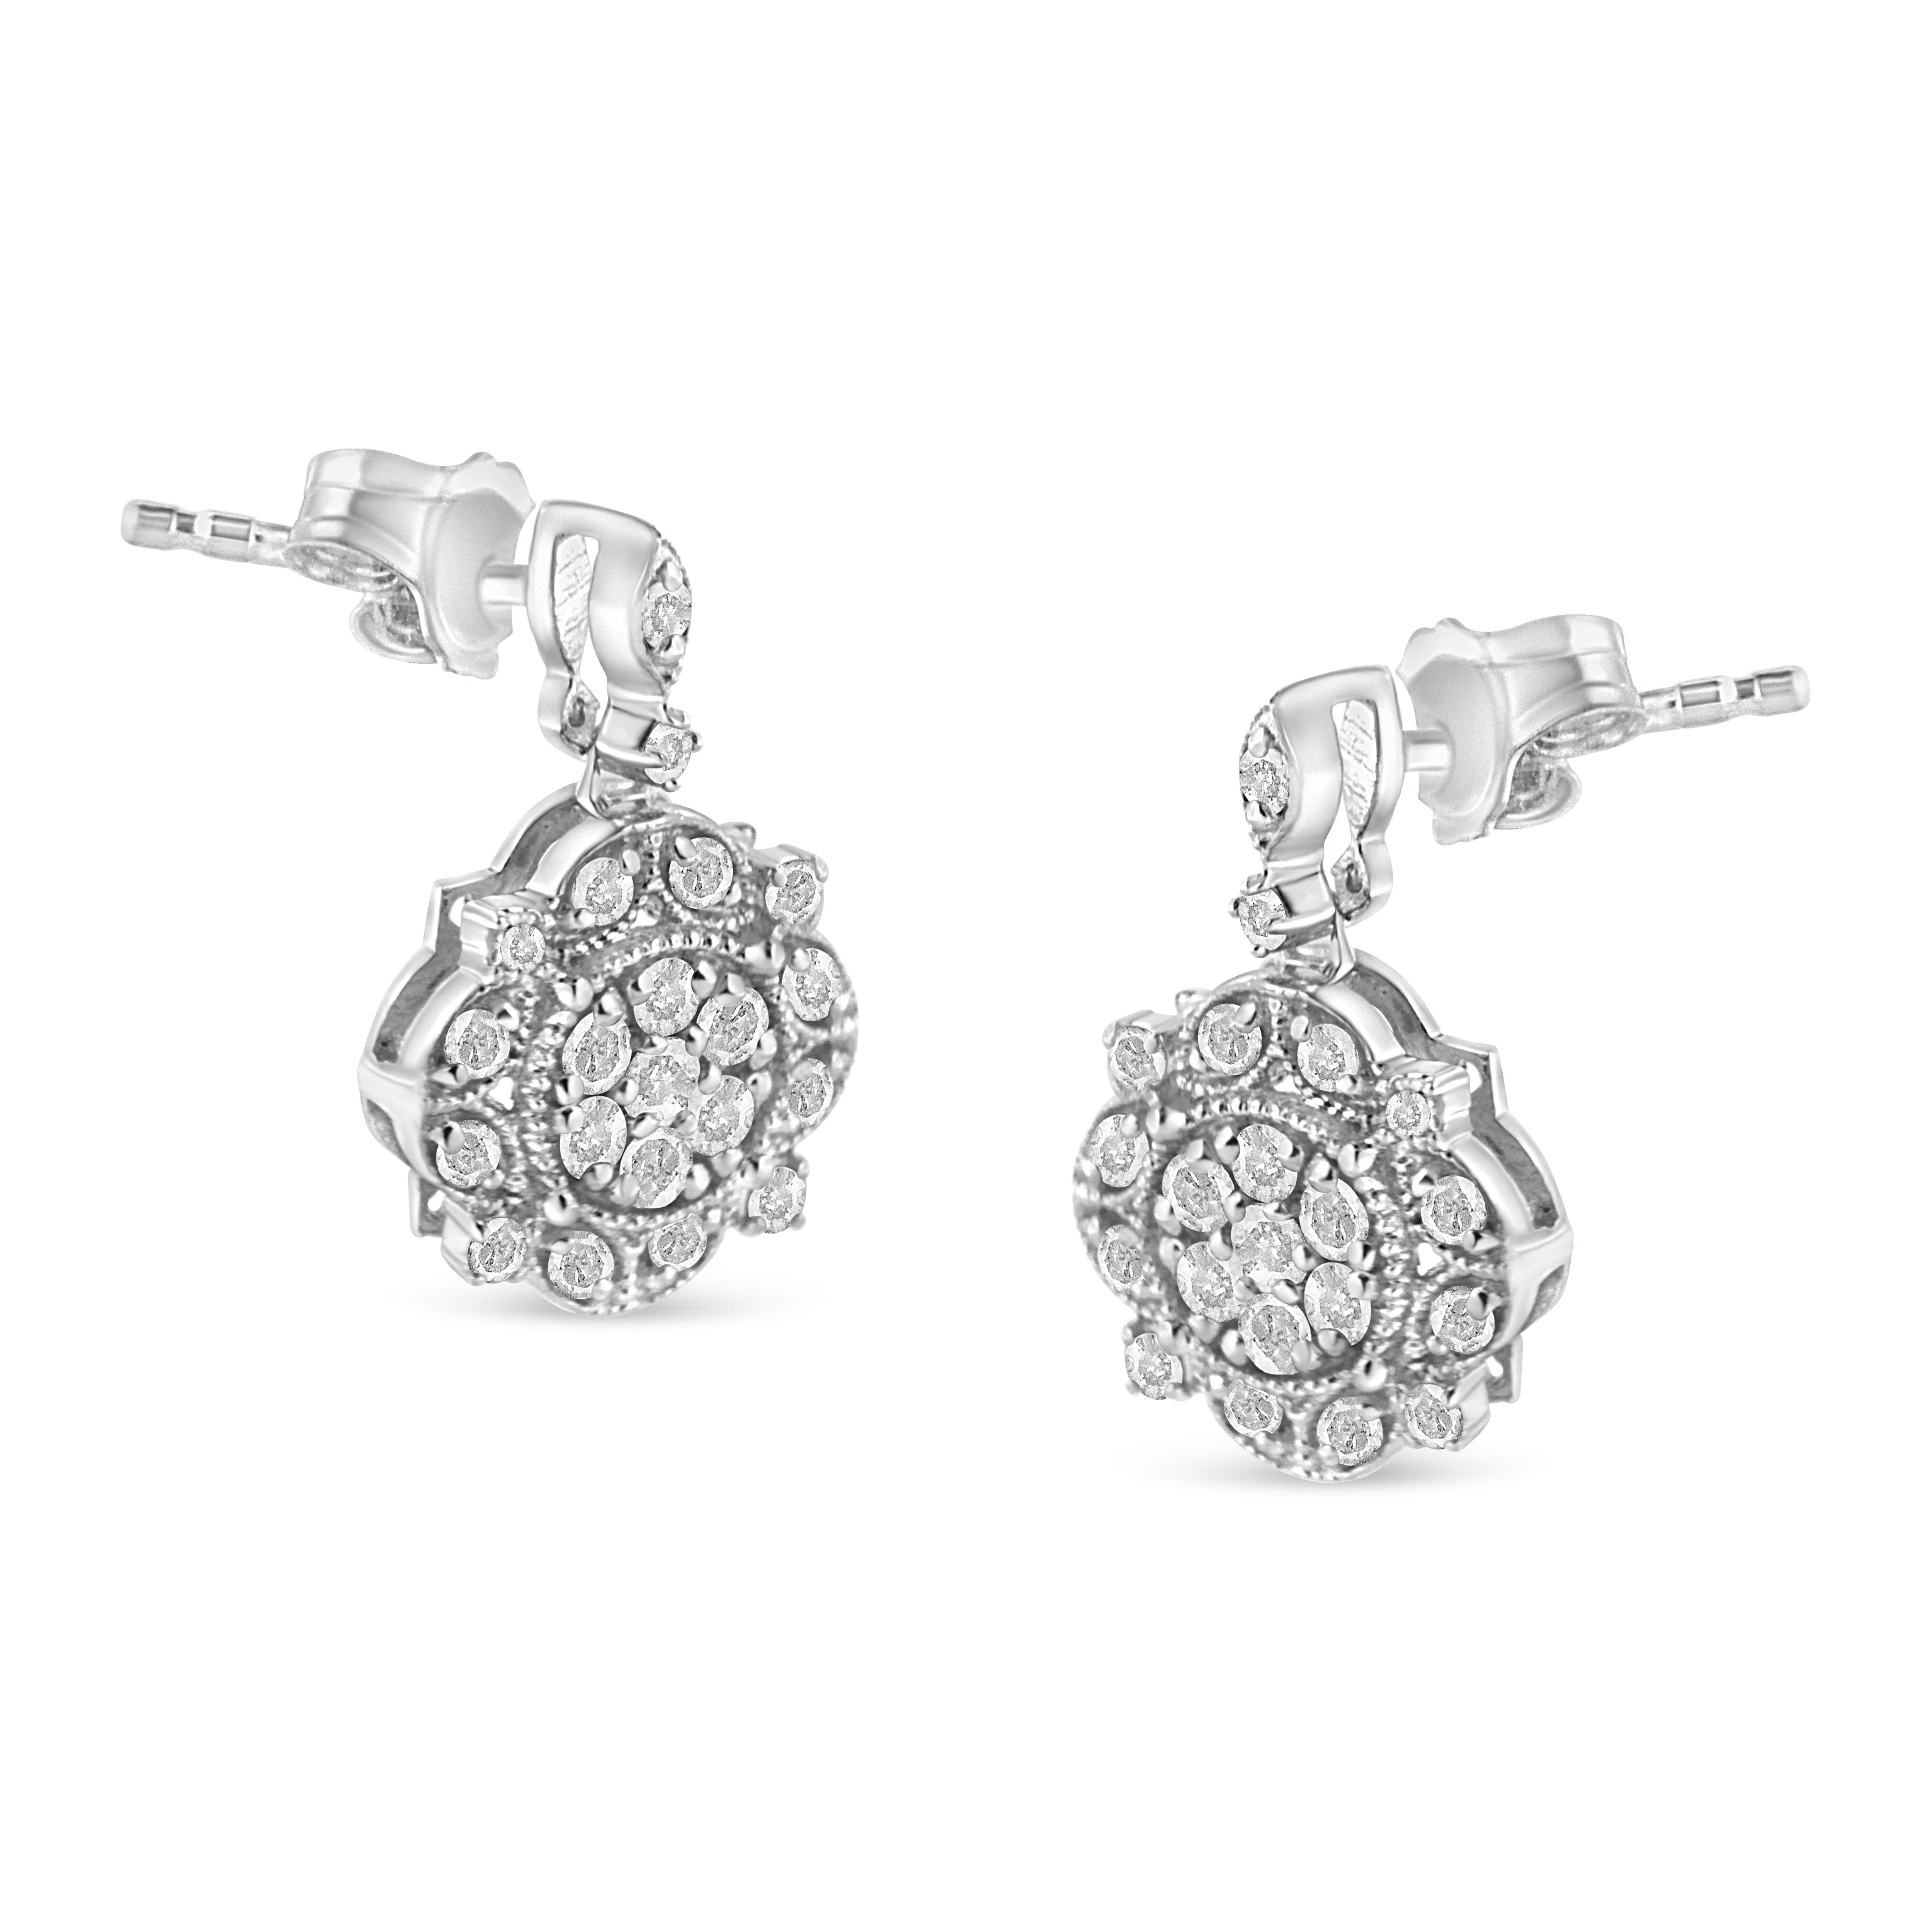 The 1/2ct TDW diamonds set on the .925 sterling silver metal in a prong design makes this a perfect piece for any function. This 4gm earring will match perfectly with all your beautiful outfits. The I2-I3 clarity diamonds makes you shine during your